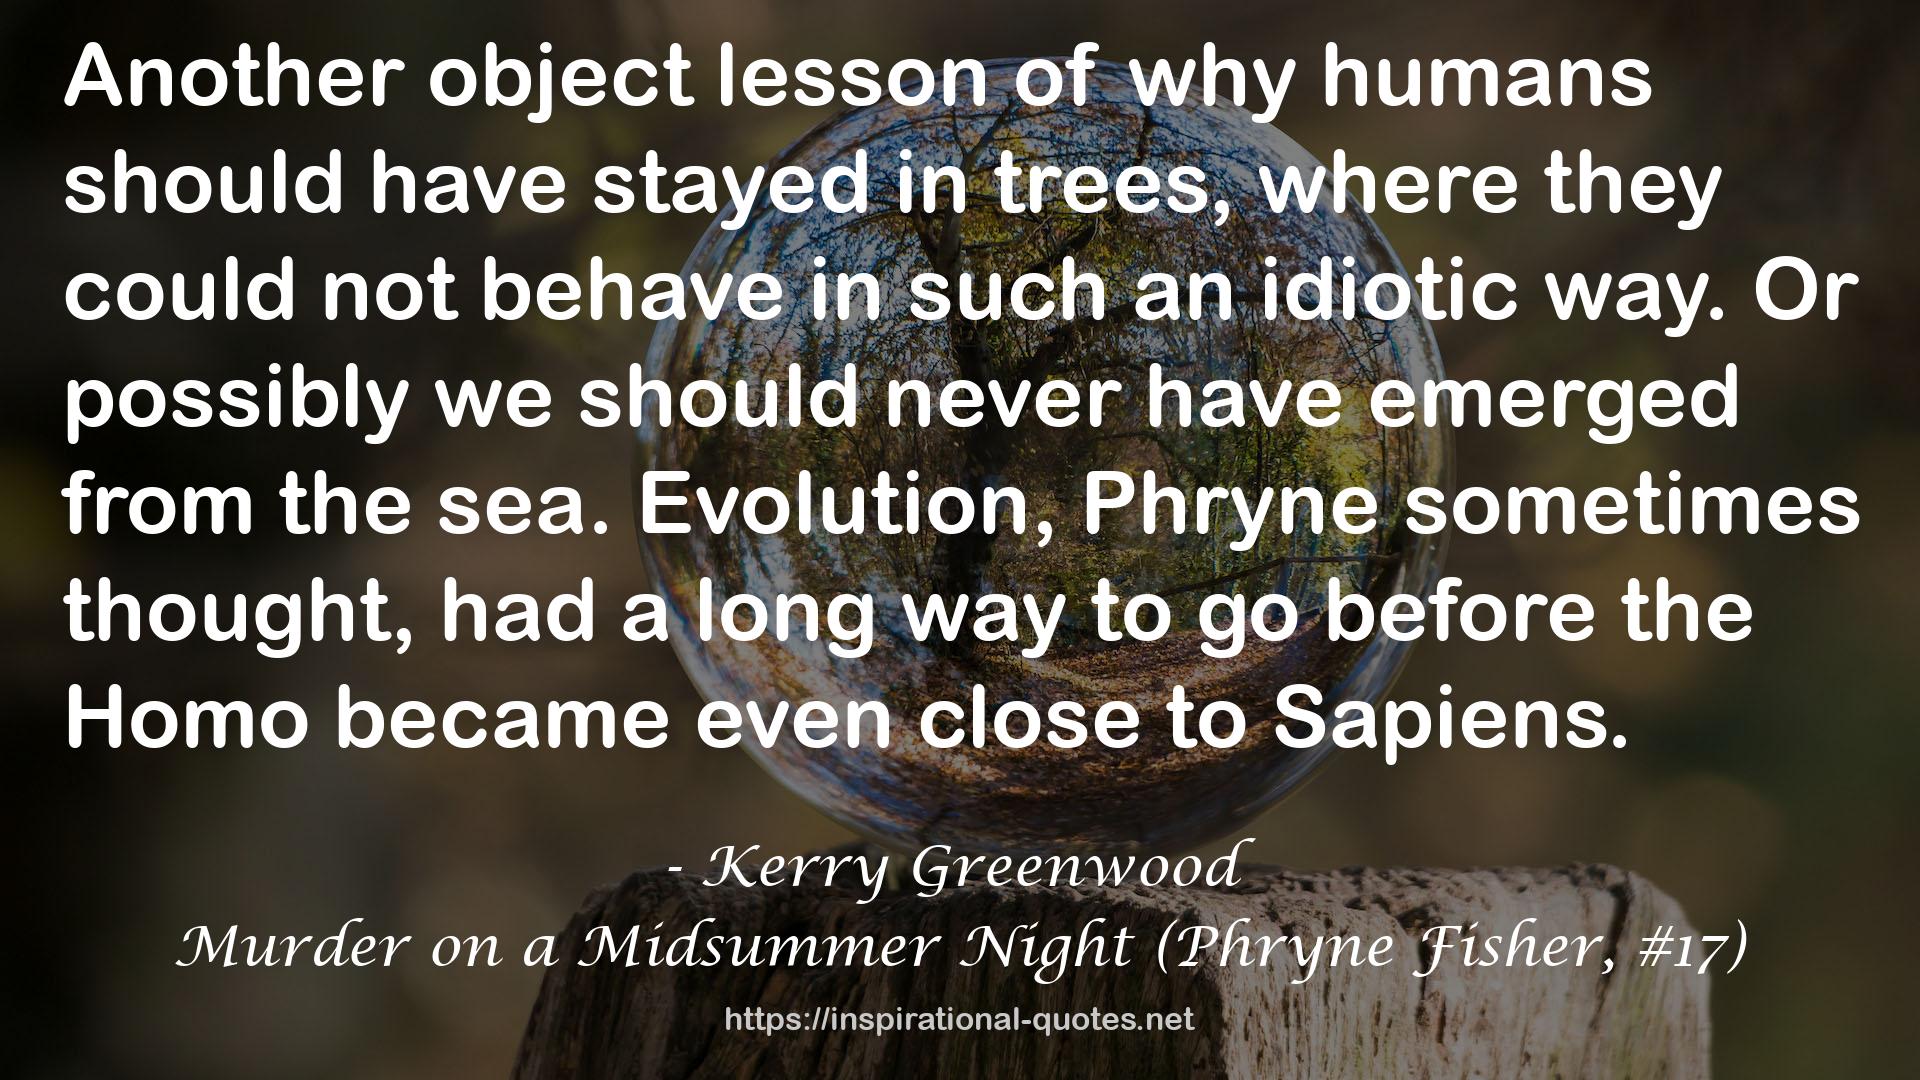 Murder on a Midsummer Night (Phryne Fisher, #17) QUOTES